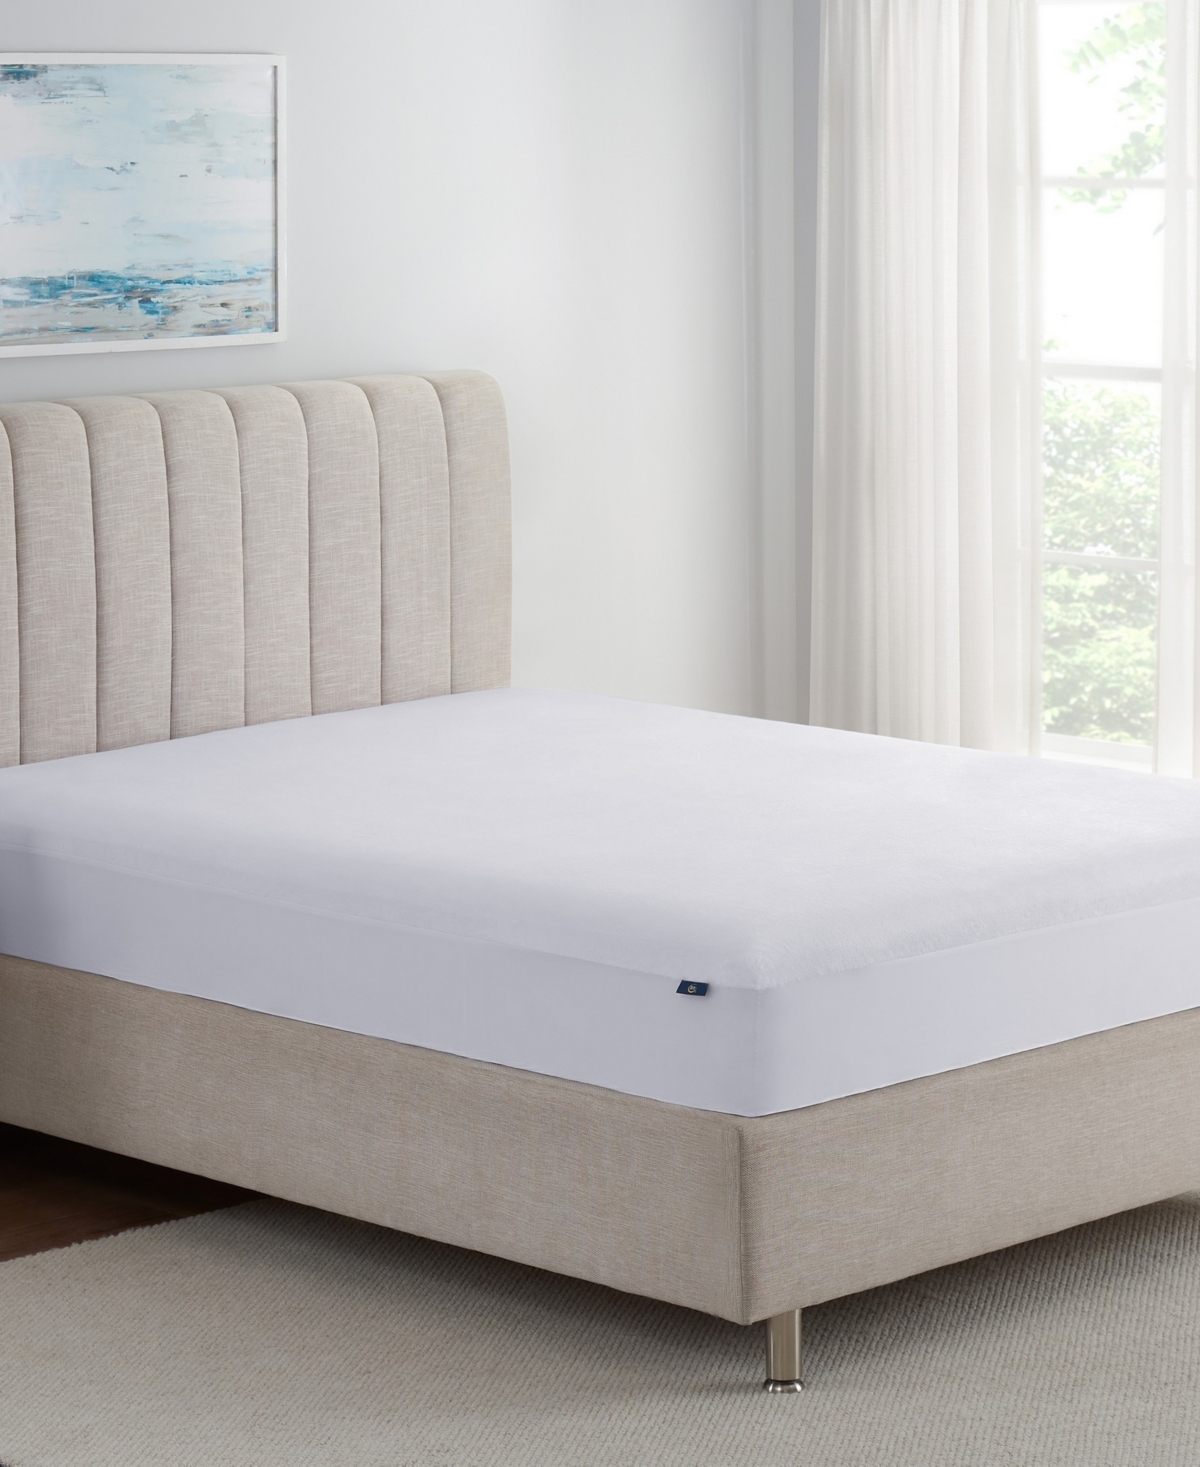 Serta Soft Top Water-resistant Mattress Protector, Twin Xl In White